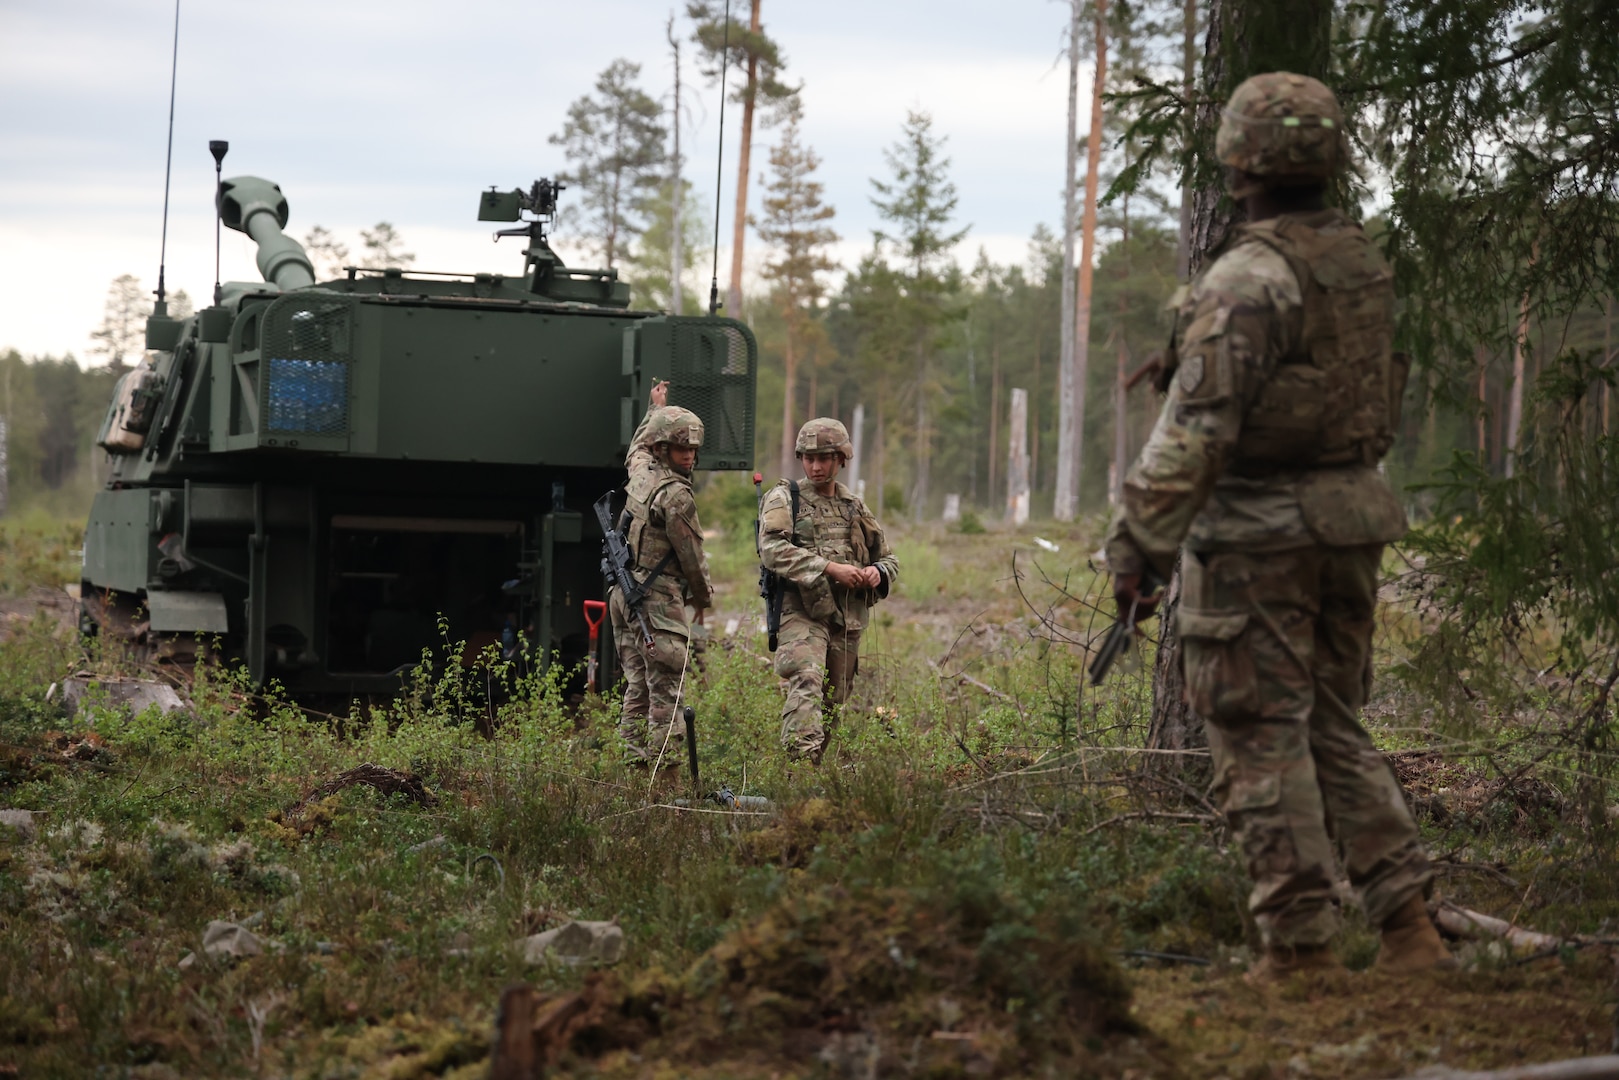 Soldiers assigned to Bravo Battery, 1st Battalion, 214th Artillery Regiment, 648th Maneuver Enhancement Brigade, Georgia Army National Guard set up an antenna group during exercise DEFENDER 24 in Skillingaryd, Sweden, May 6, 2024. DEFENDER 24 is linked to NATO's Steadfast Defender exercise, and the Department of Defense's Large Scale Global Exercise March 28 to May 31.